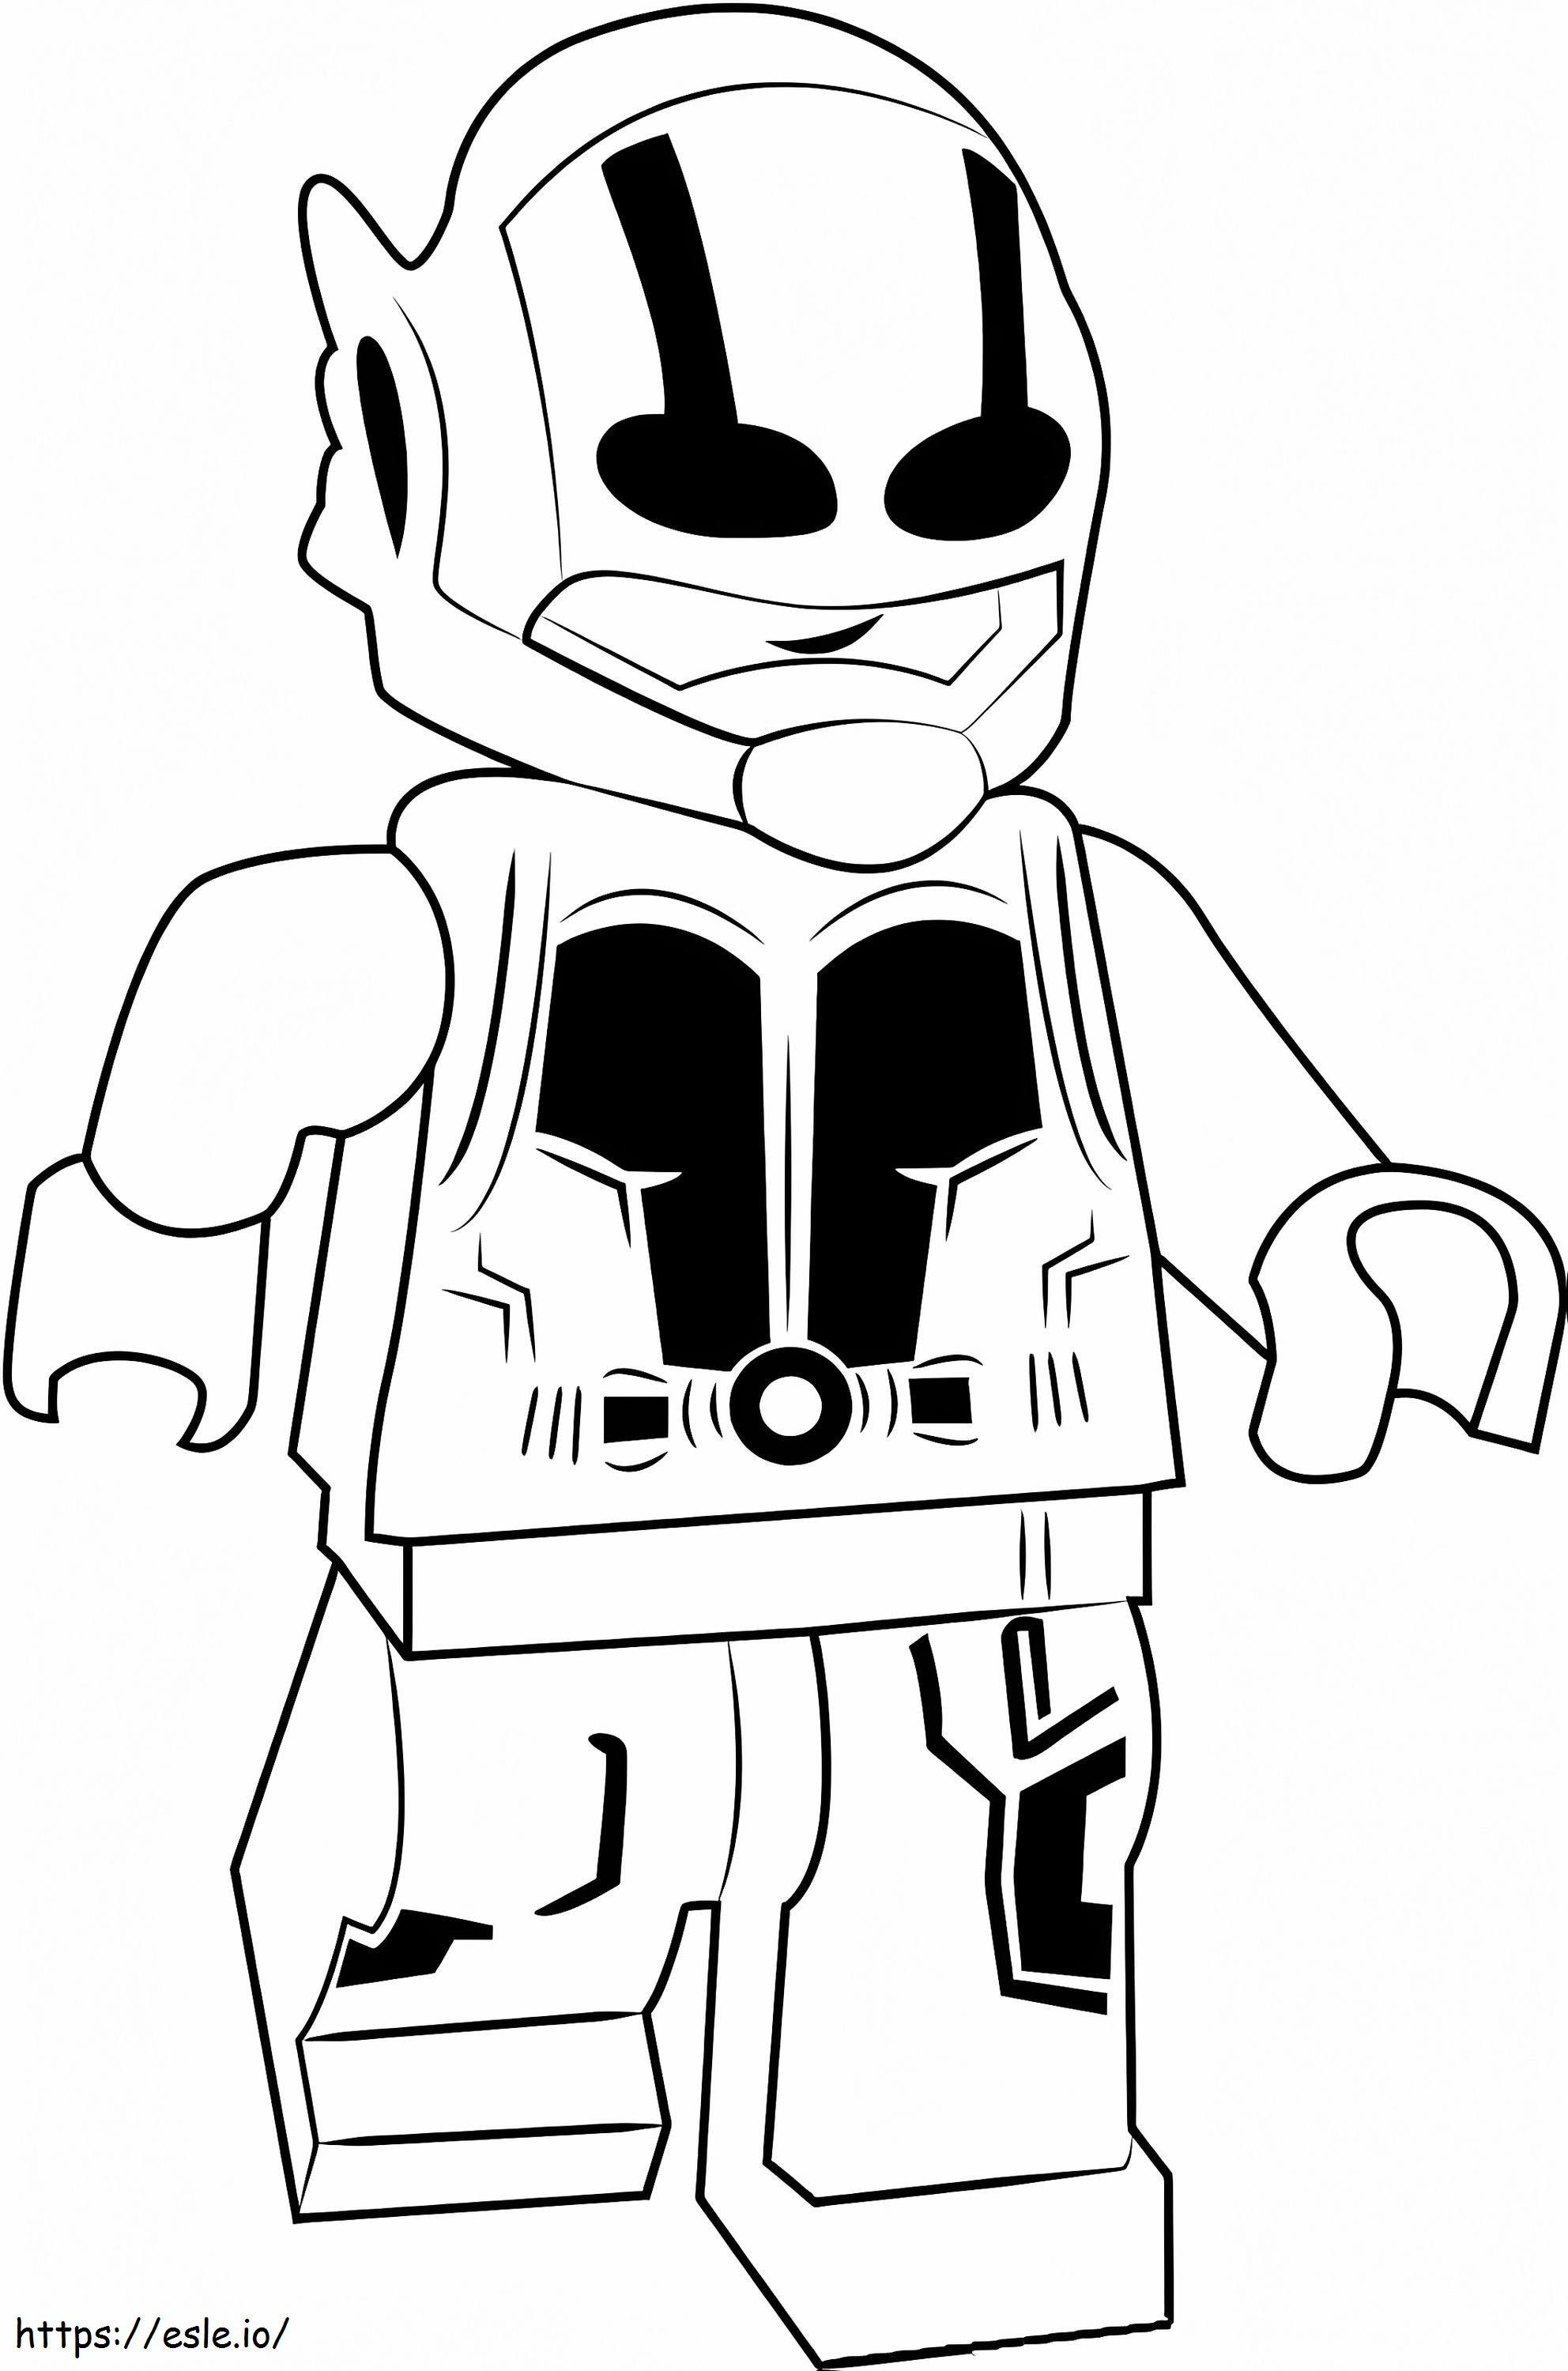 Ant Man Lego coloring page